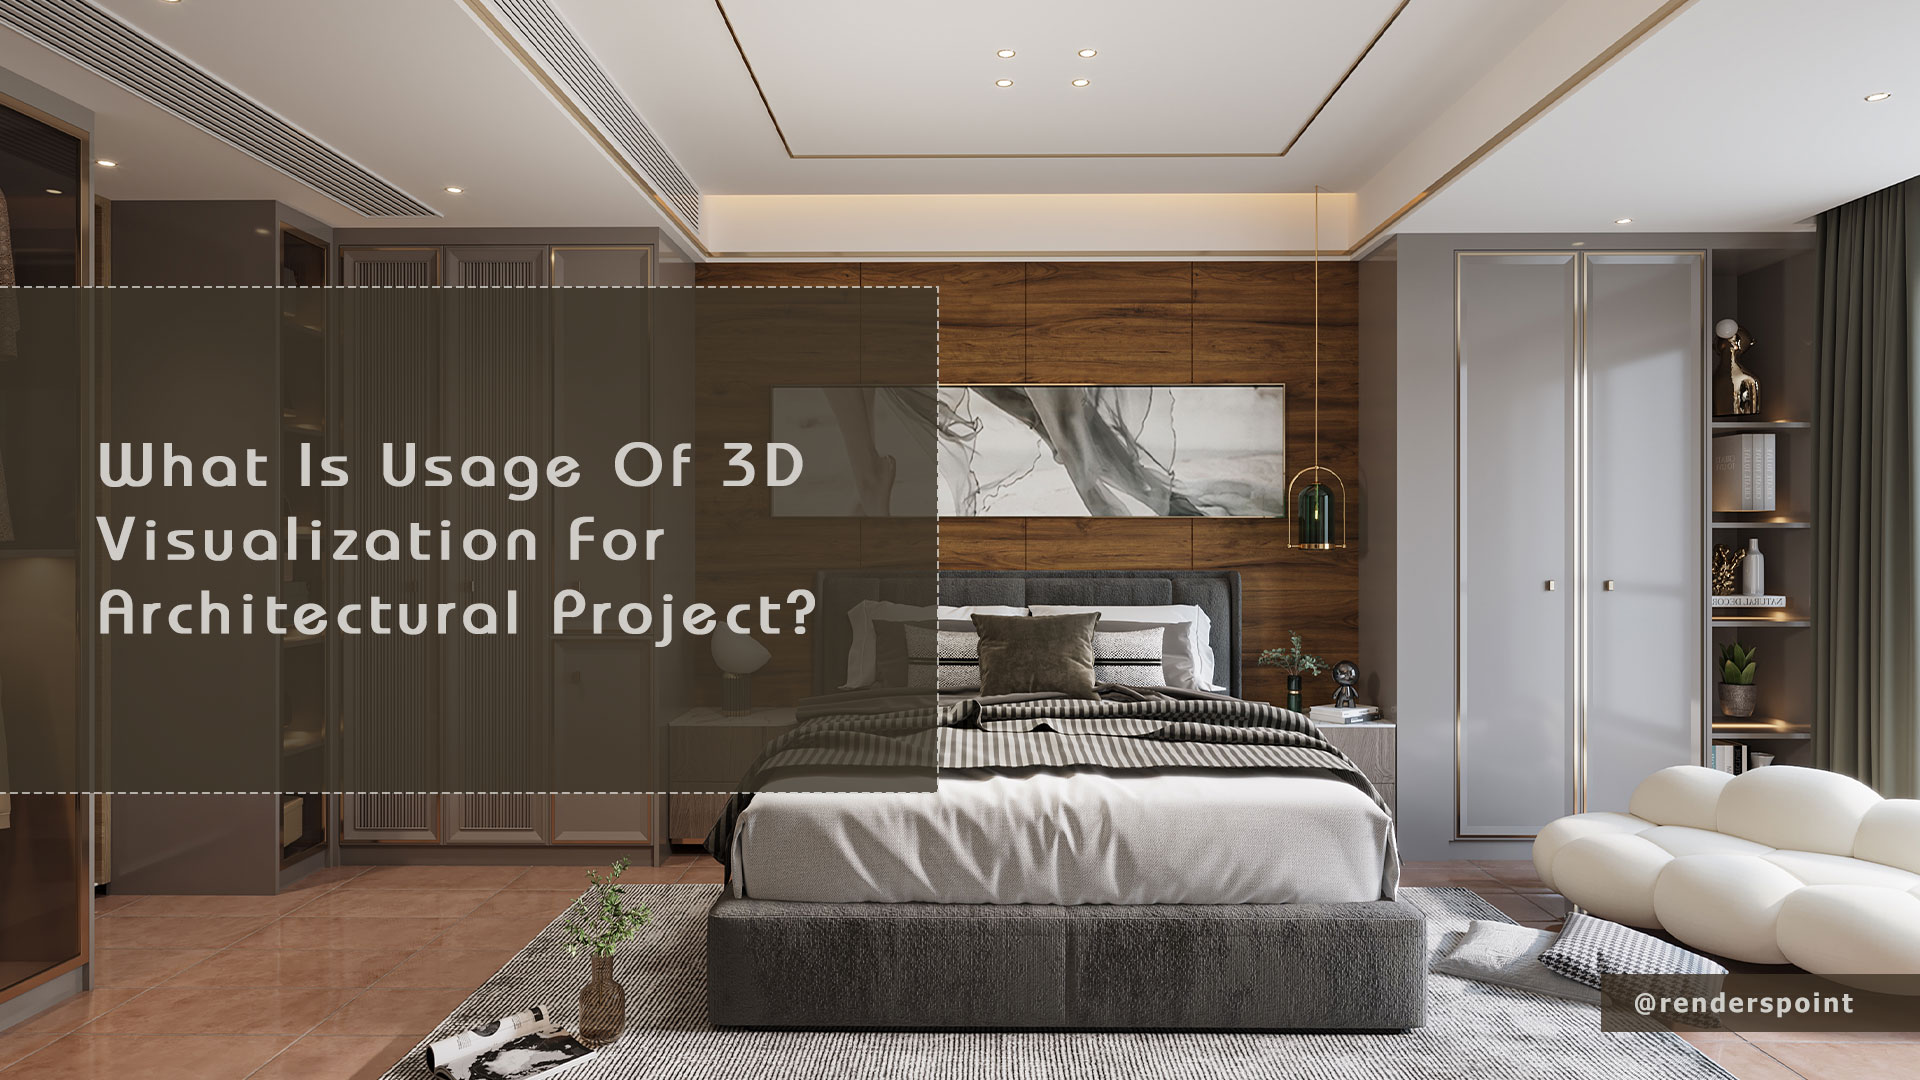 What is usage of 3D visualization for Architectural project?